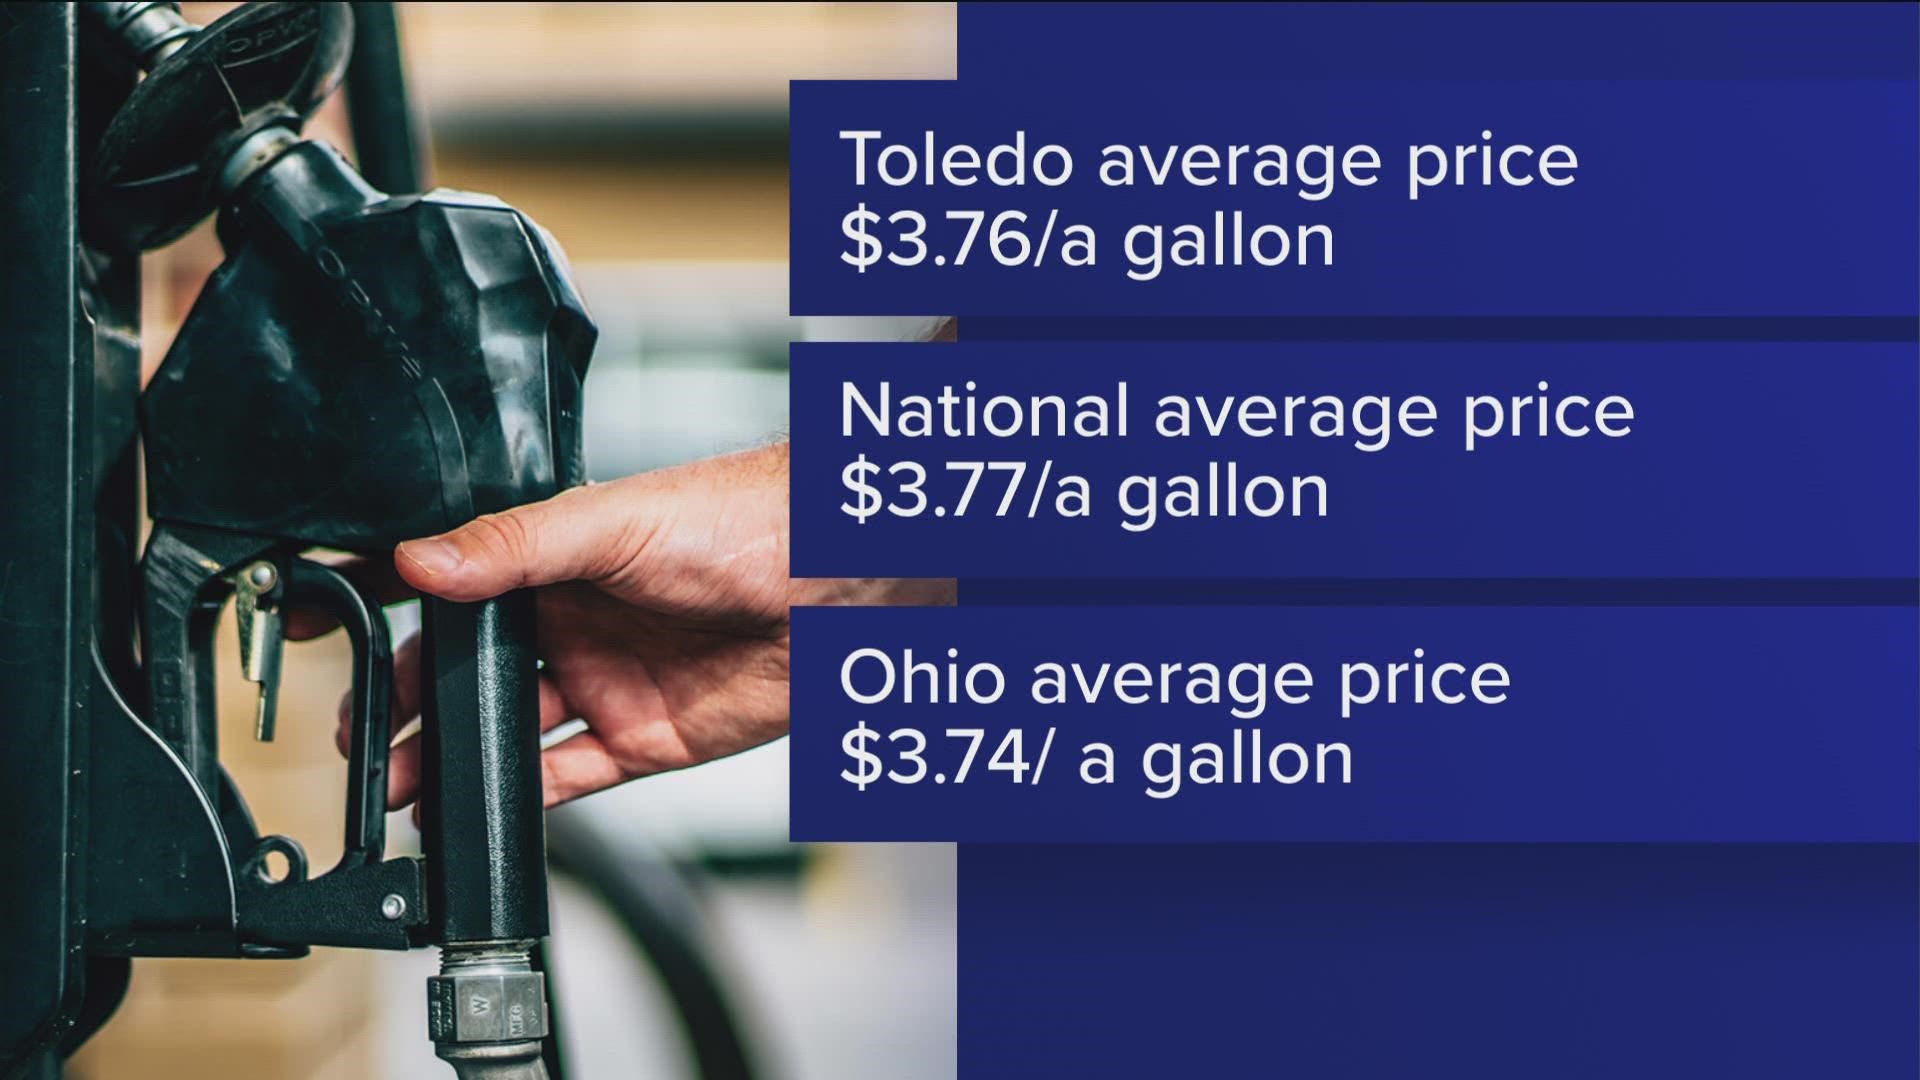 Prices are 12.7 cents lower than a month ago ad 55.9 cents higher than a year ago.